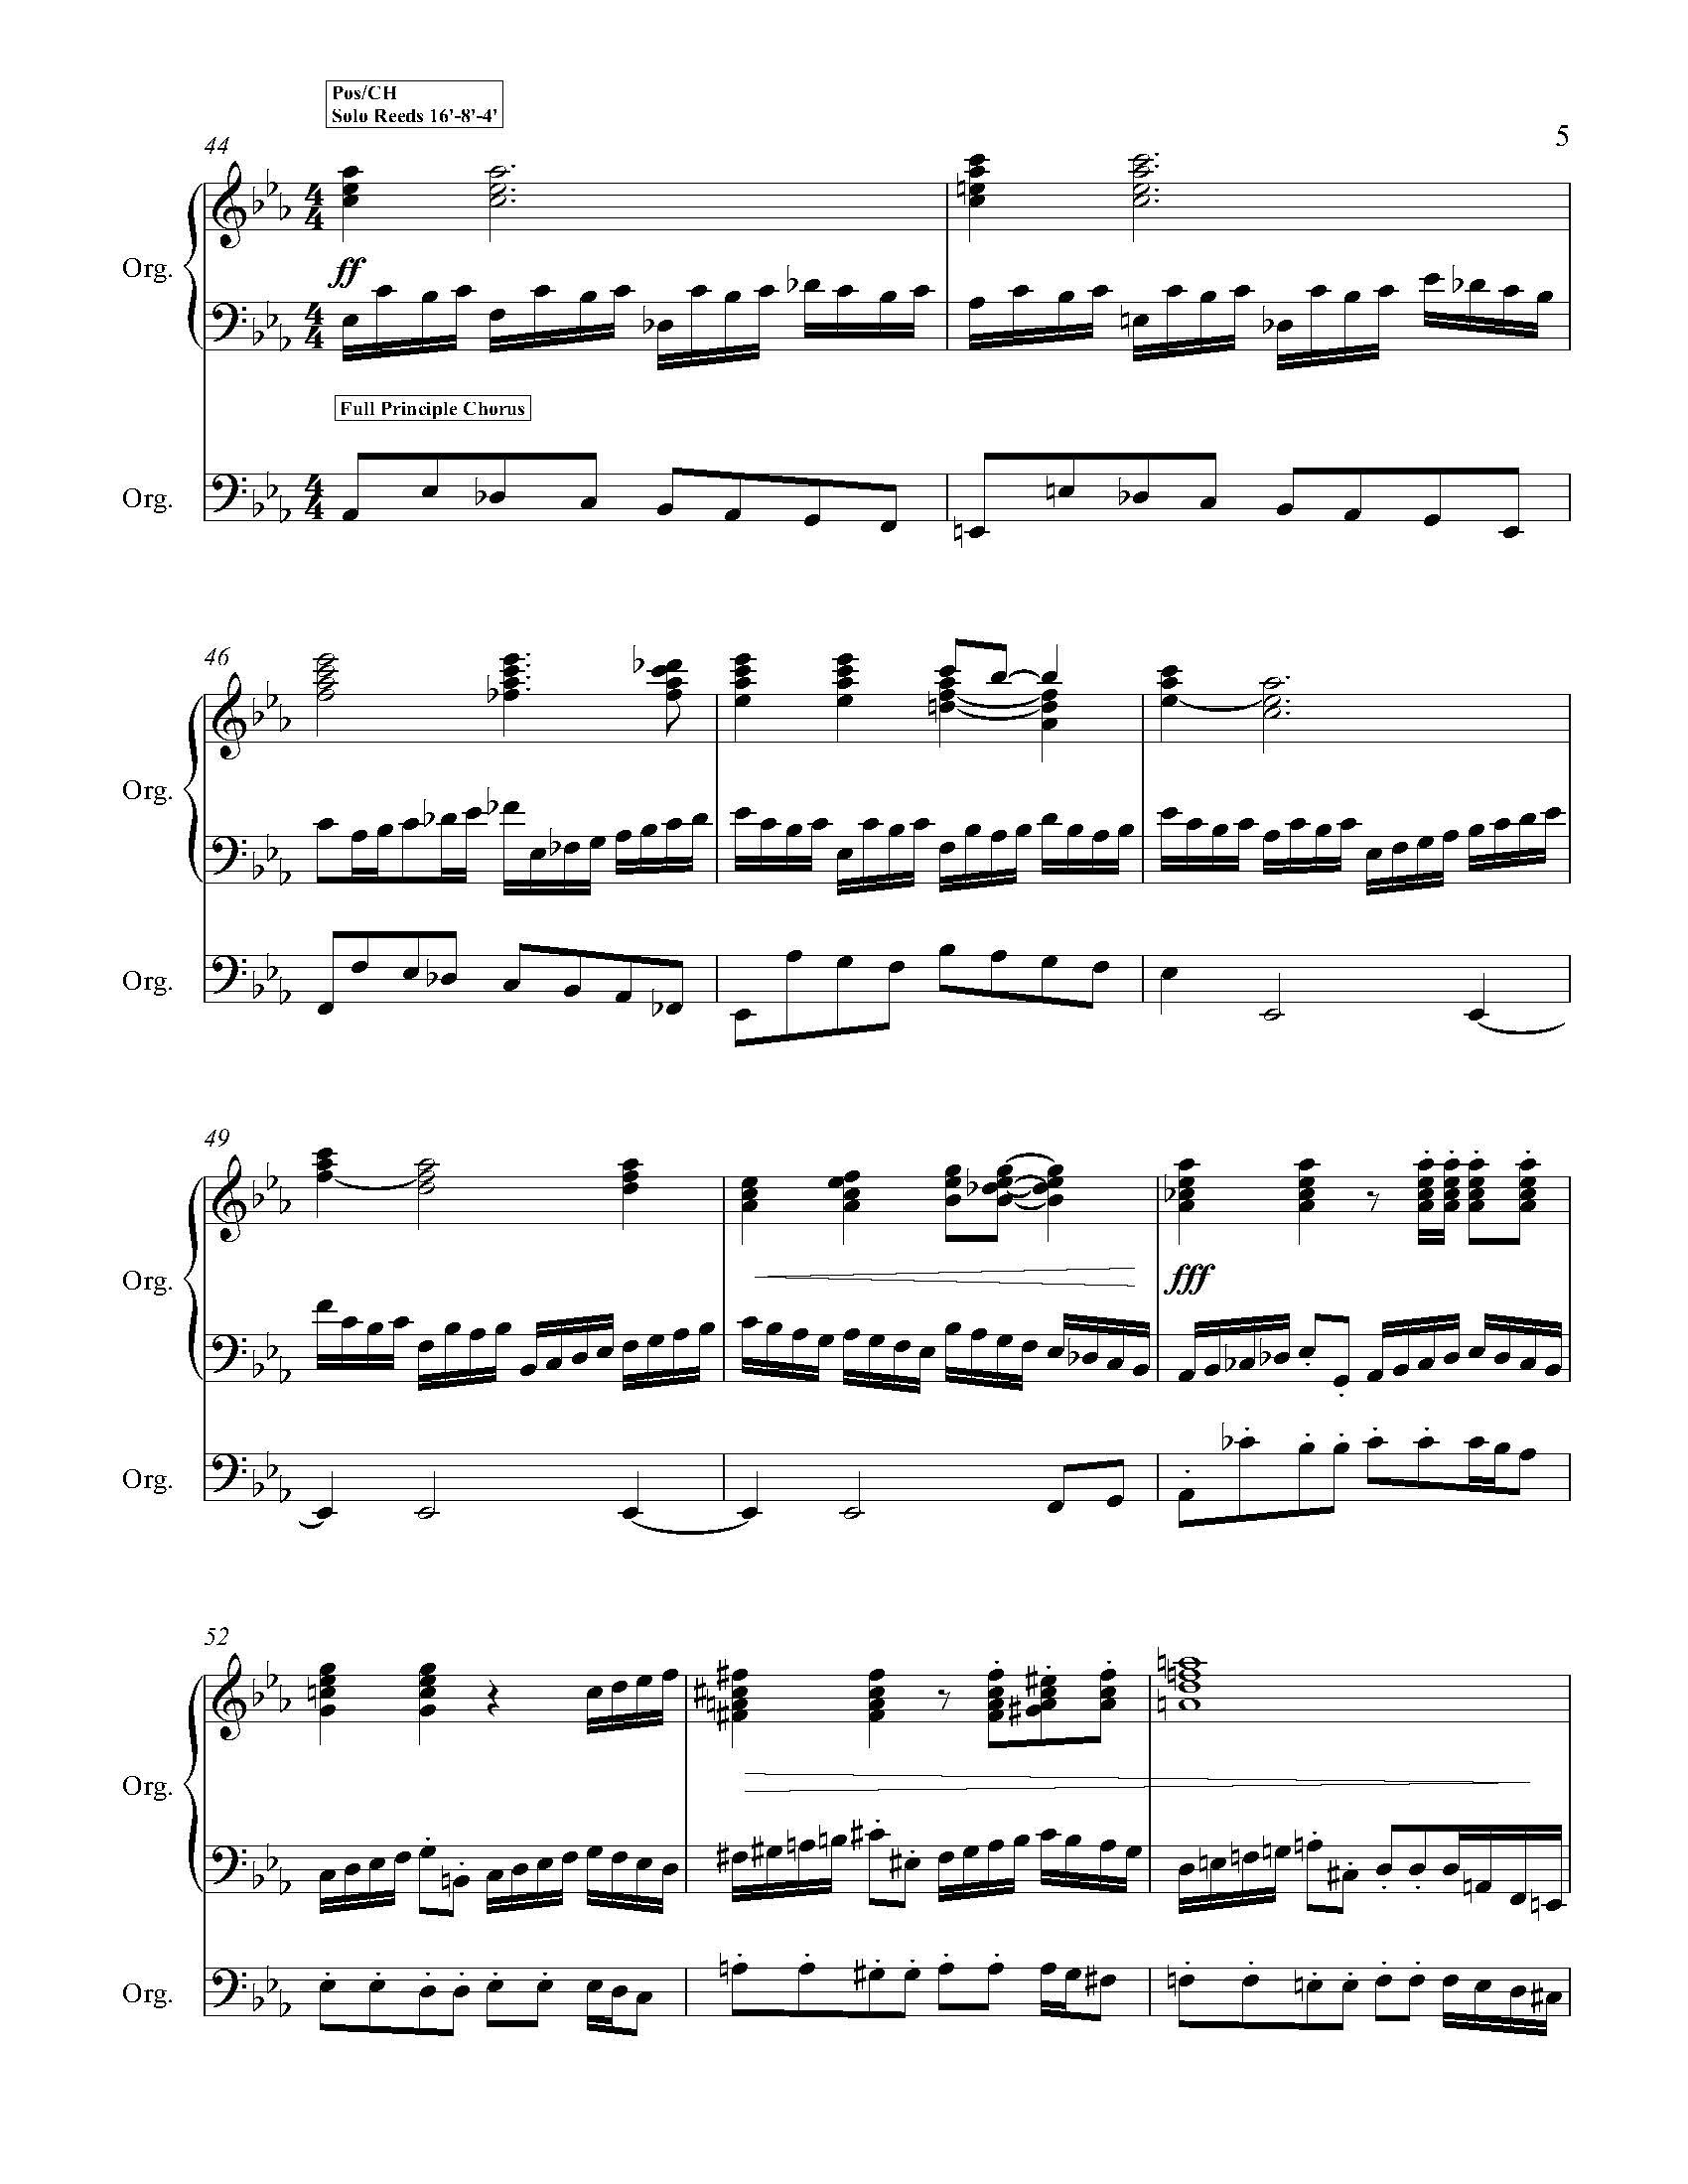 Baroque Fantasy on Go Down Moses - Complete Score_Page_11.jpg